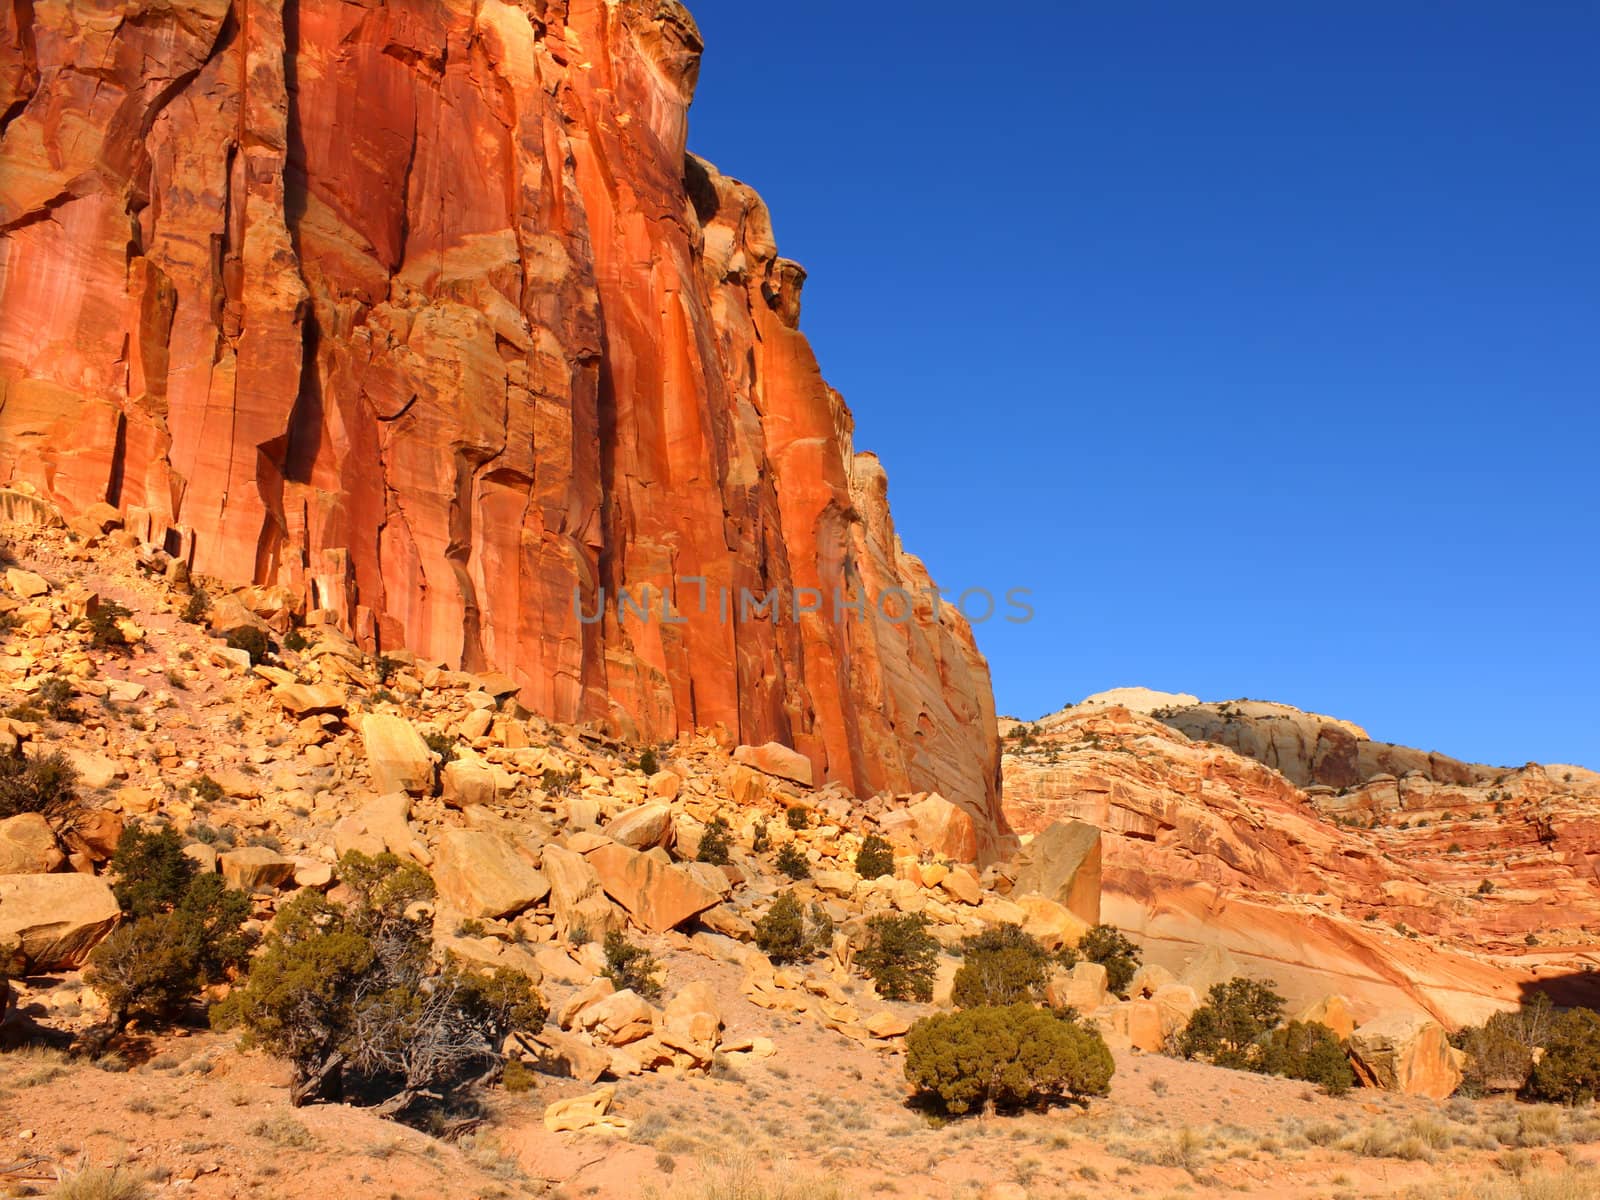 Cliffs of red rock at Capitol Reef National Park in Utah.